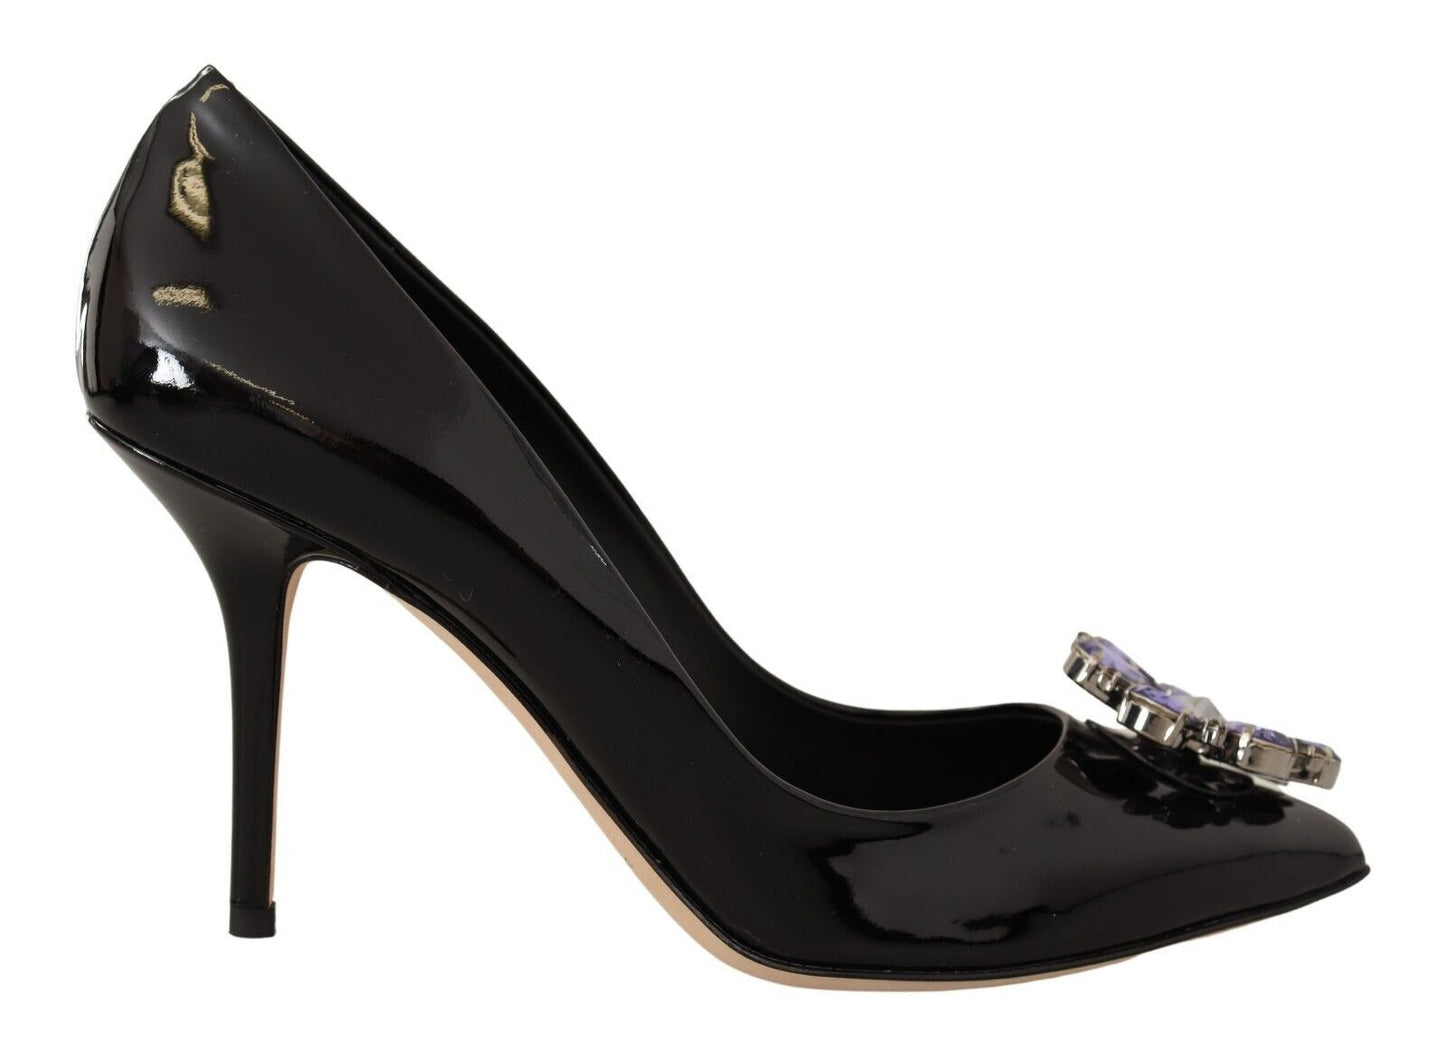 Elegant Patent Leather Pumps with Purple Crystals